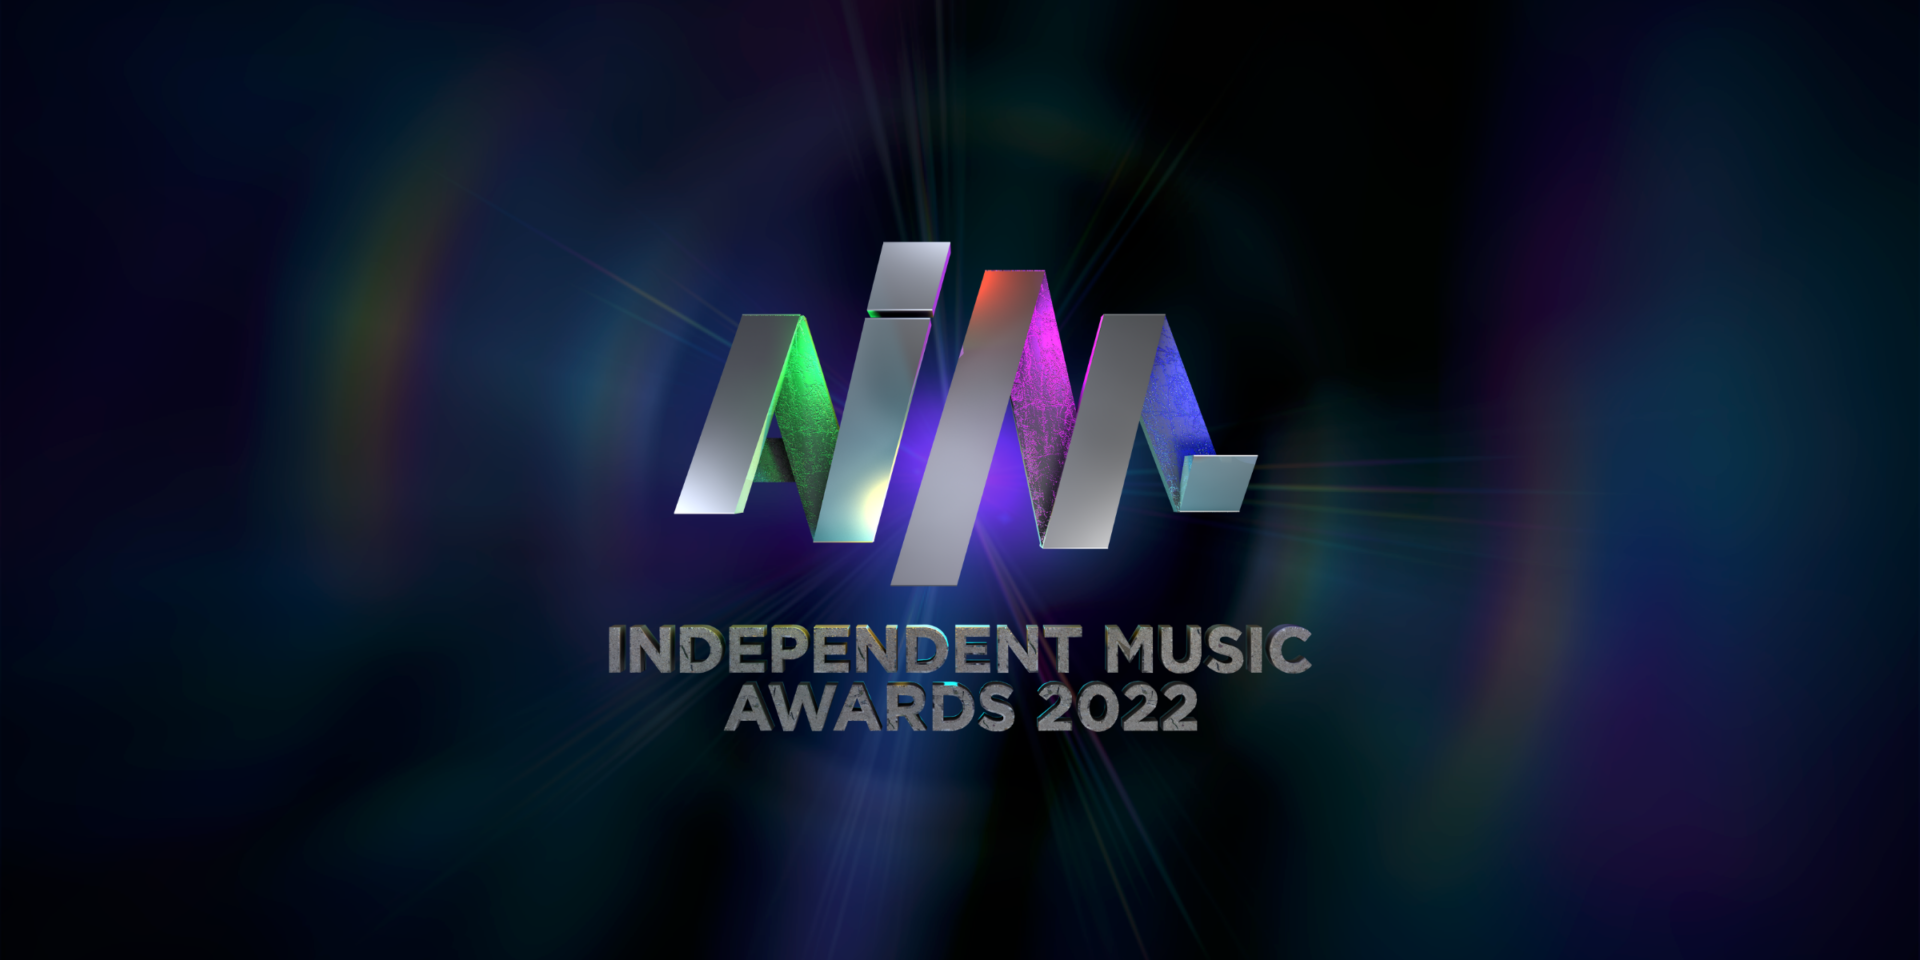 NEWS: The Association of Independent Music - AIM Awards reveal nominees